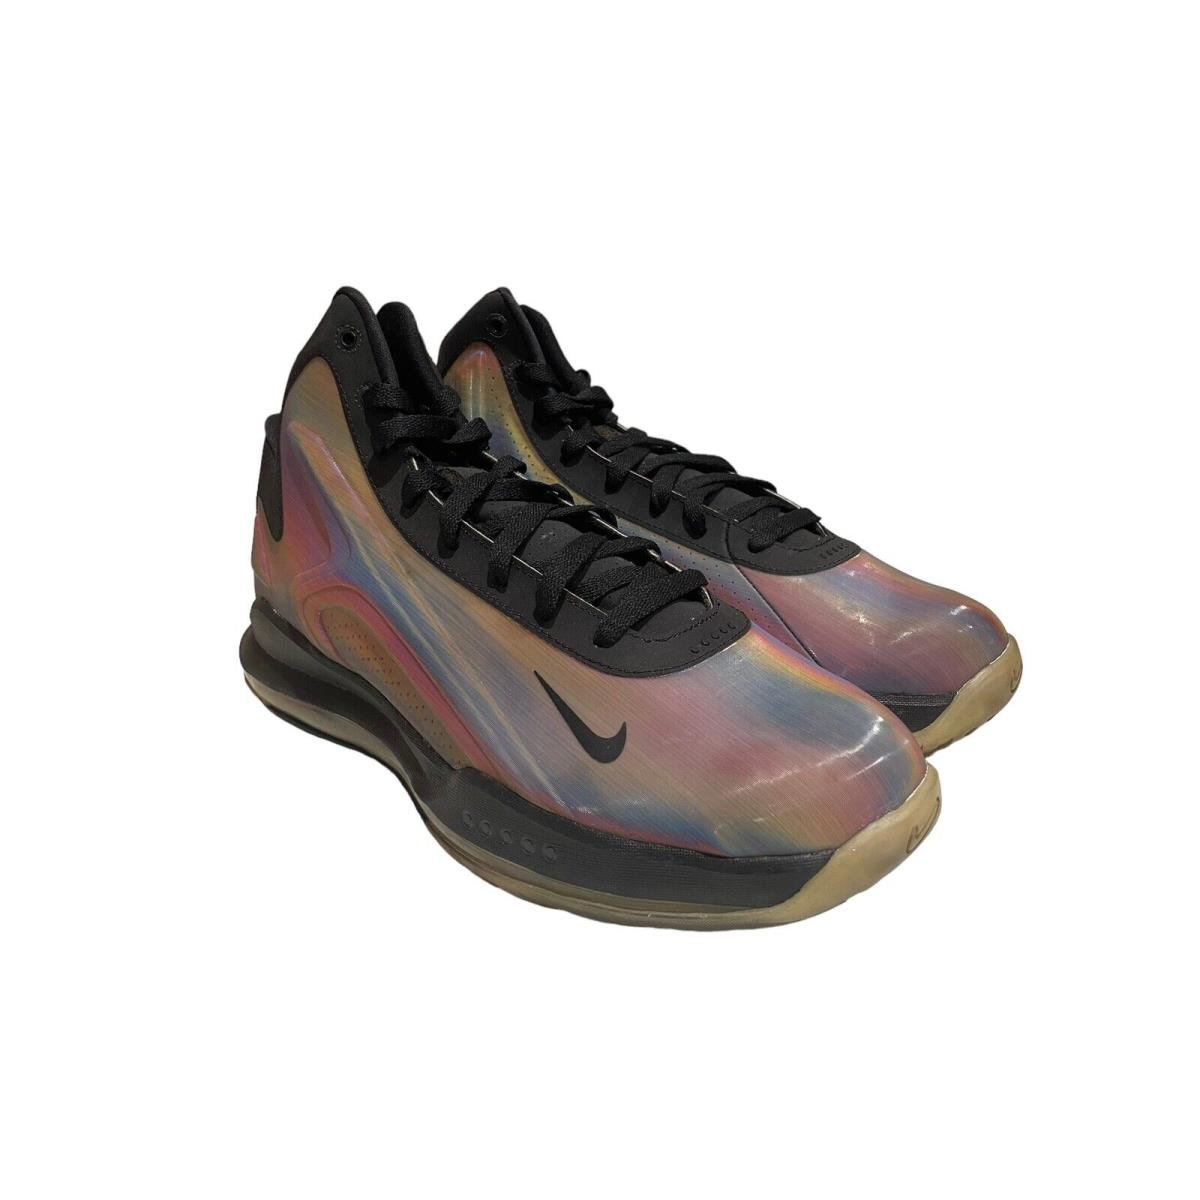 Nike Zoom Hyperflight Max Hologram Size 11 599451-601 DS - Red